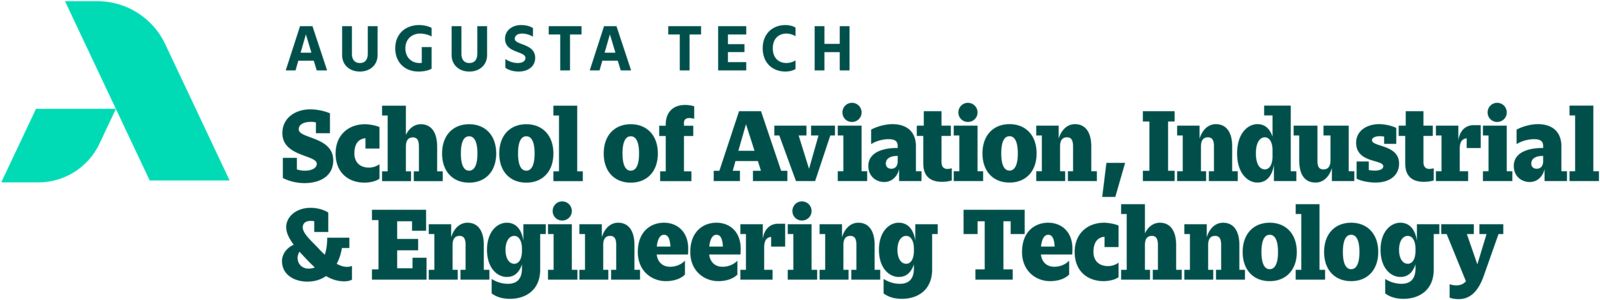 An uppercase abstract A in mint green composed of a smaller leg representing Augusta Technical College supporting the larger leg representing the Augusta Community and economy. The words Augusta Tech and School of Aviation, Industrial and Engineering Technology are in heritage green font to the right of the a, stacked in three horizontal rows with School of Aviation, Industrial, and Engineering Technology in bold font.